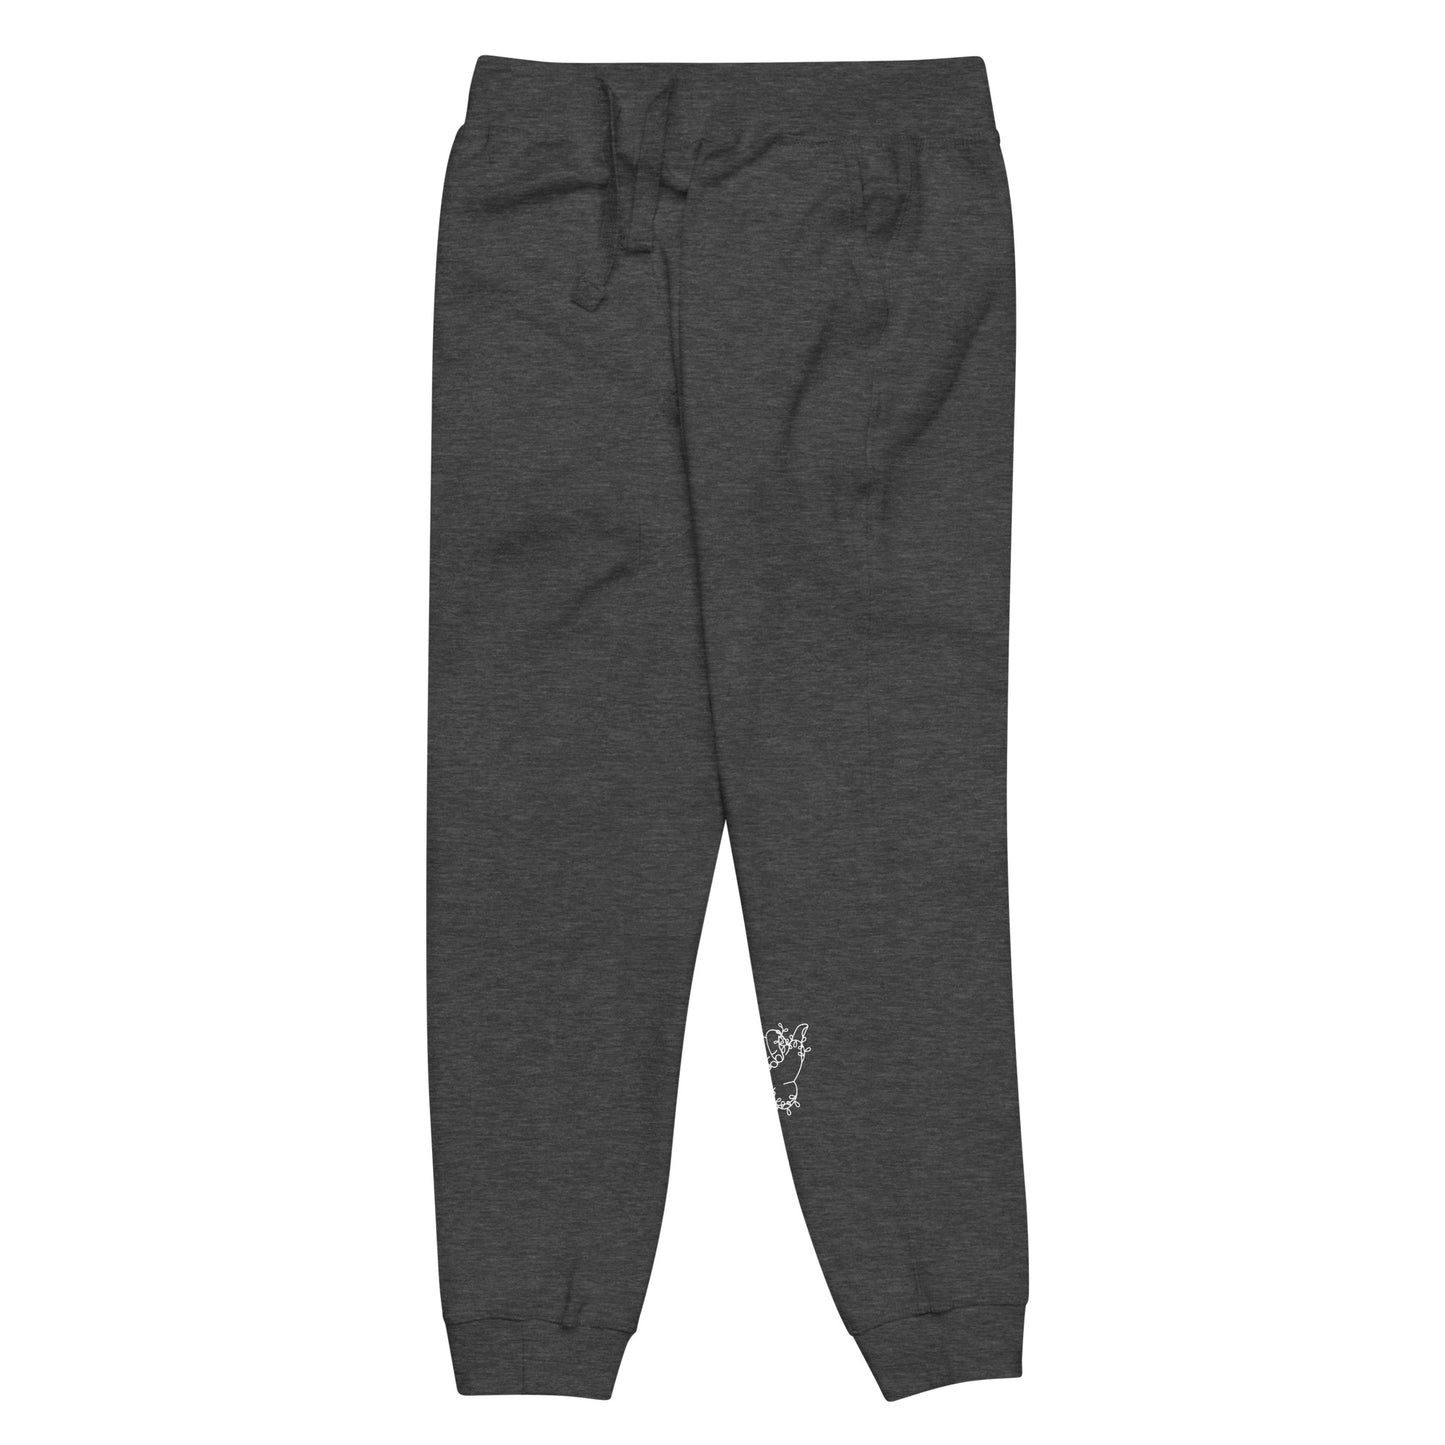 FORAL GNARLY Fleece Sweatpants